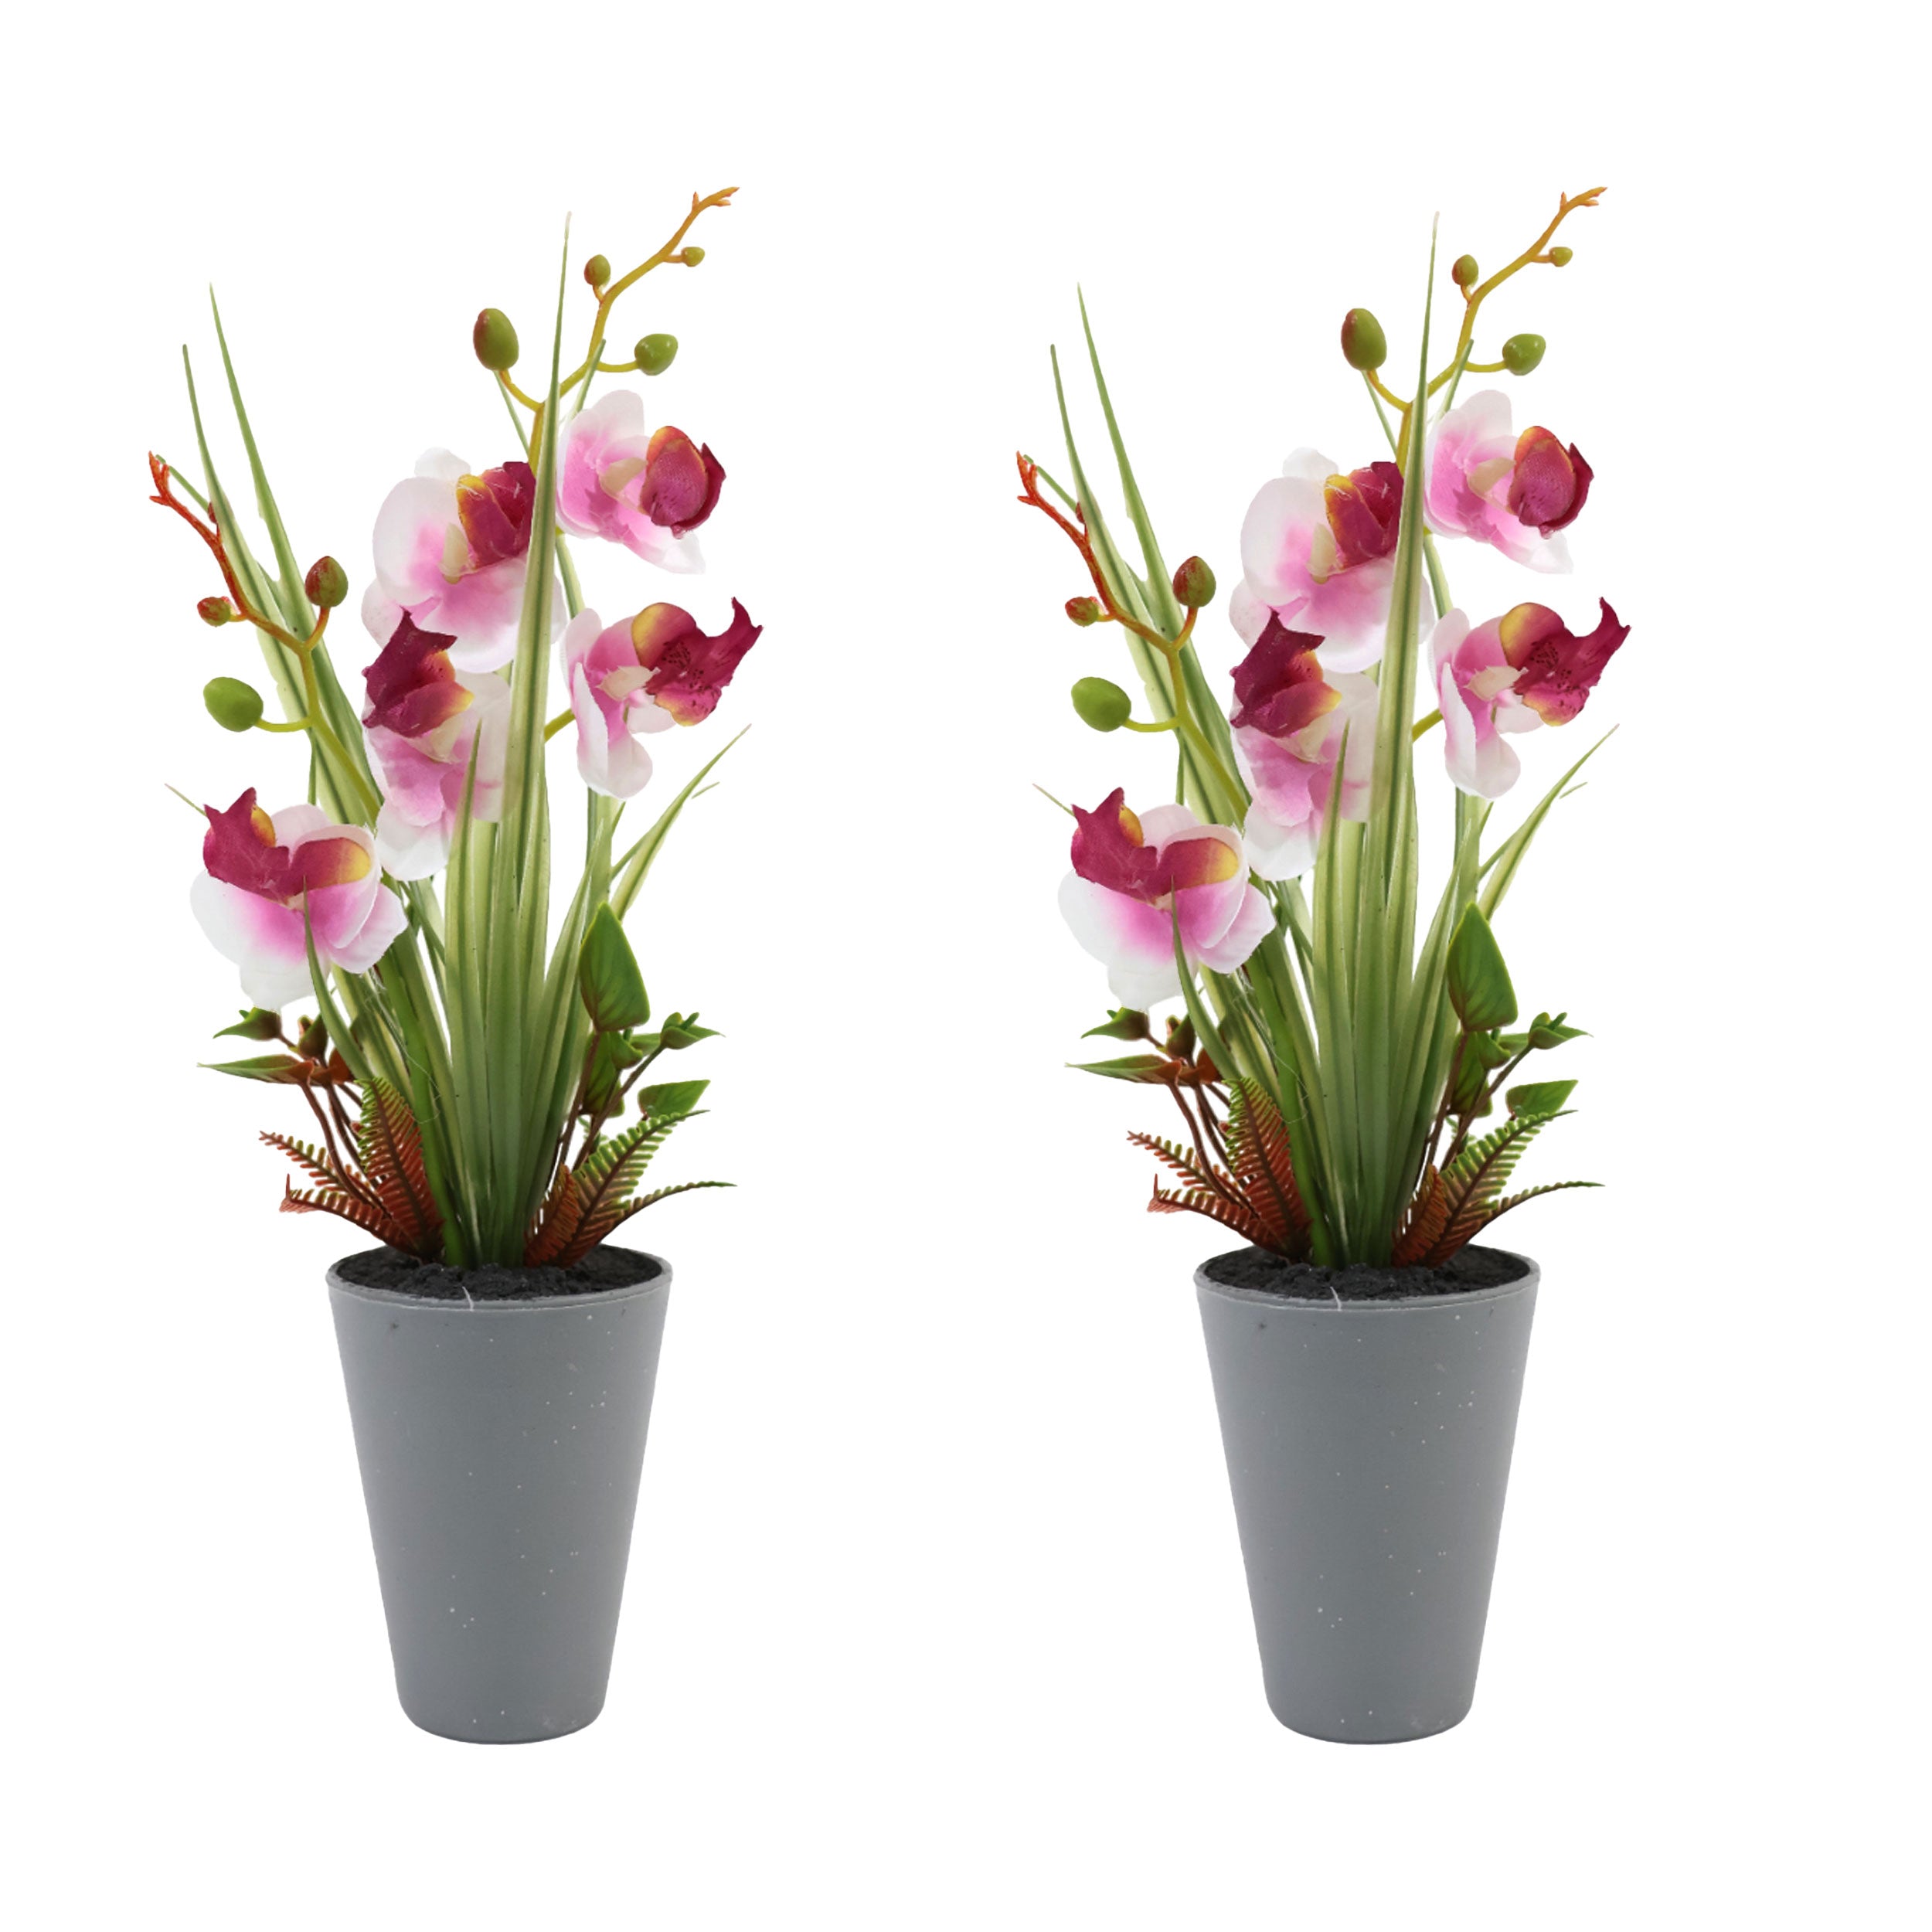 Aavana greens Artificial Bonsai Plant, Orchid Artificial Flowers Plant, Artificial Decorative Plant Home Office Indoor and Outdoor Decoration Option 1